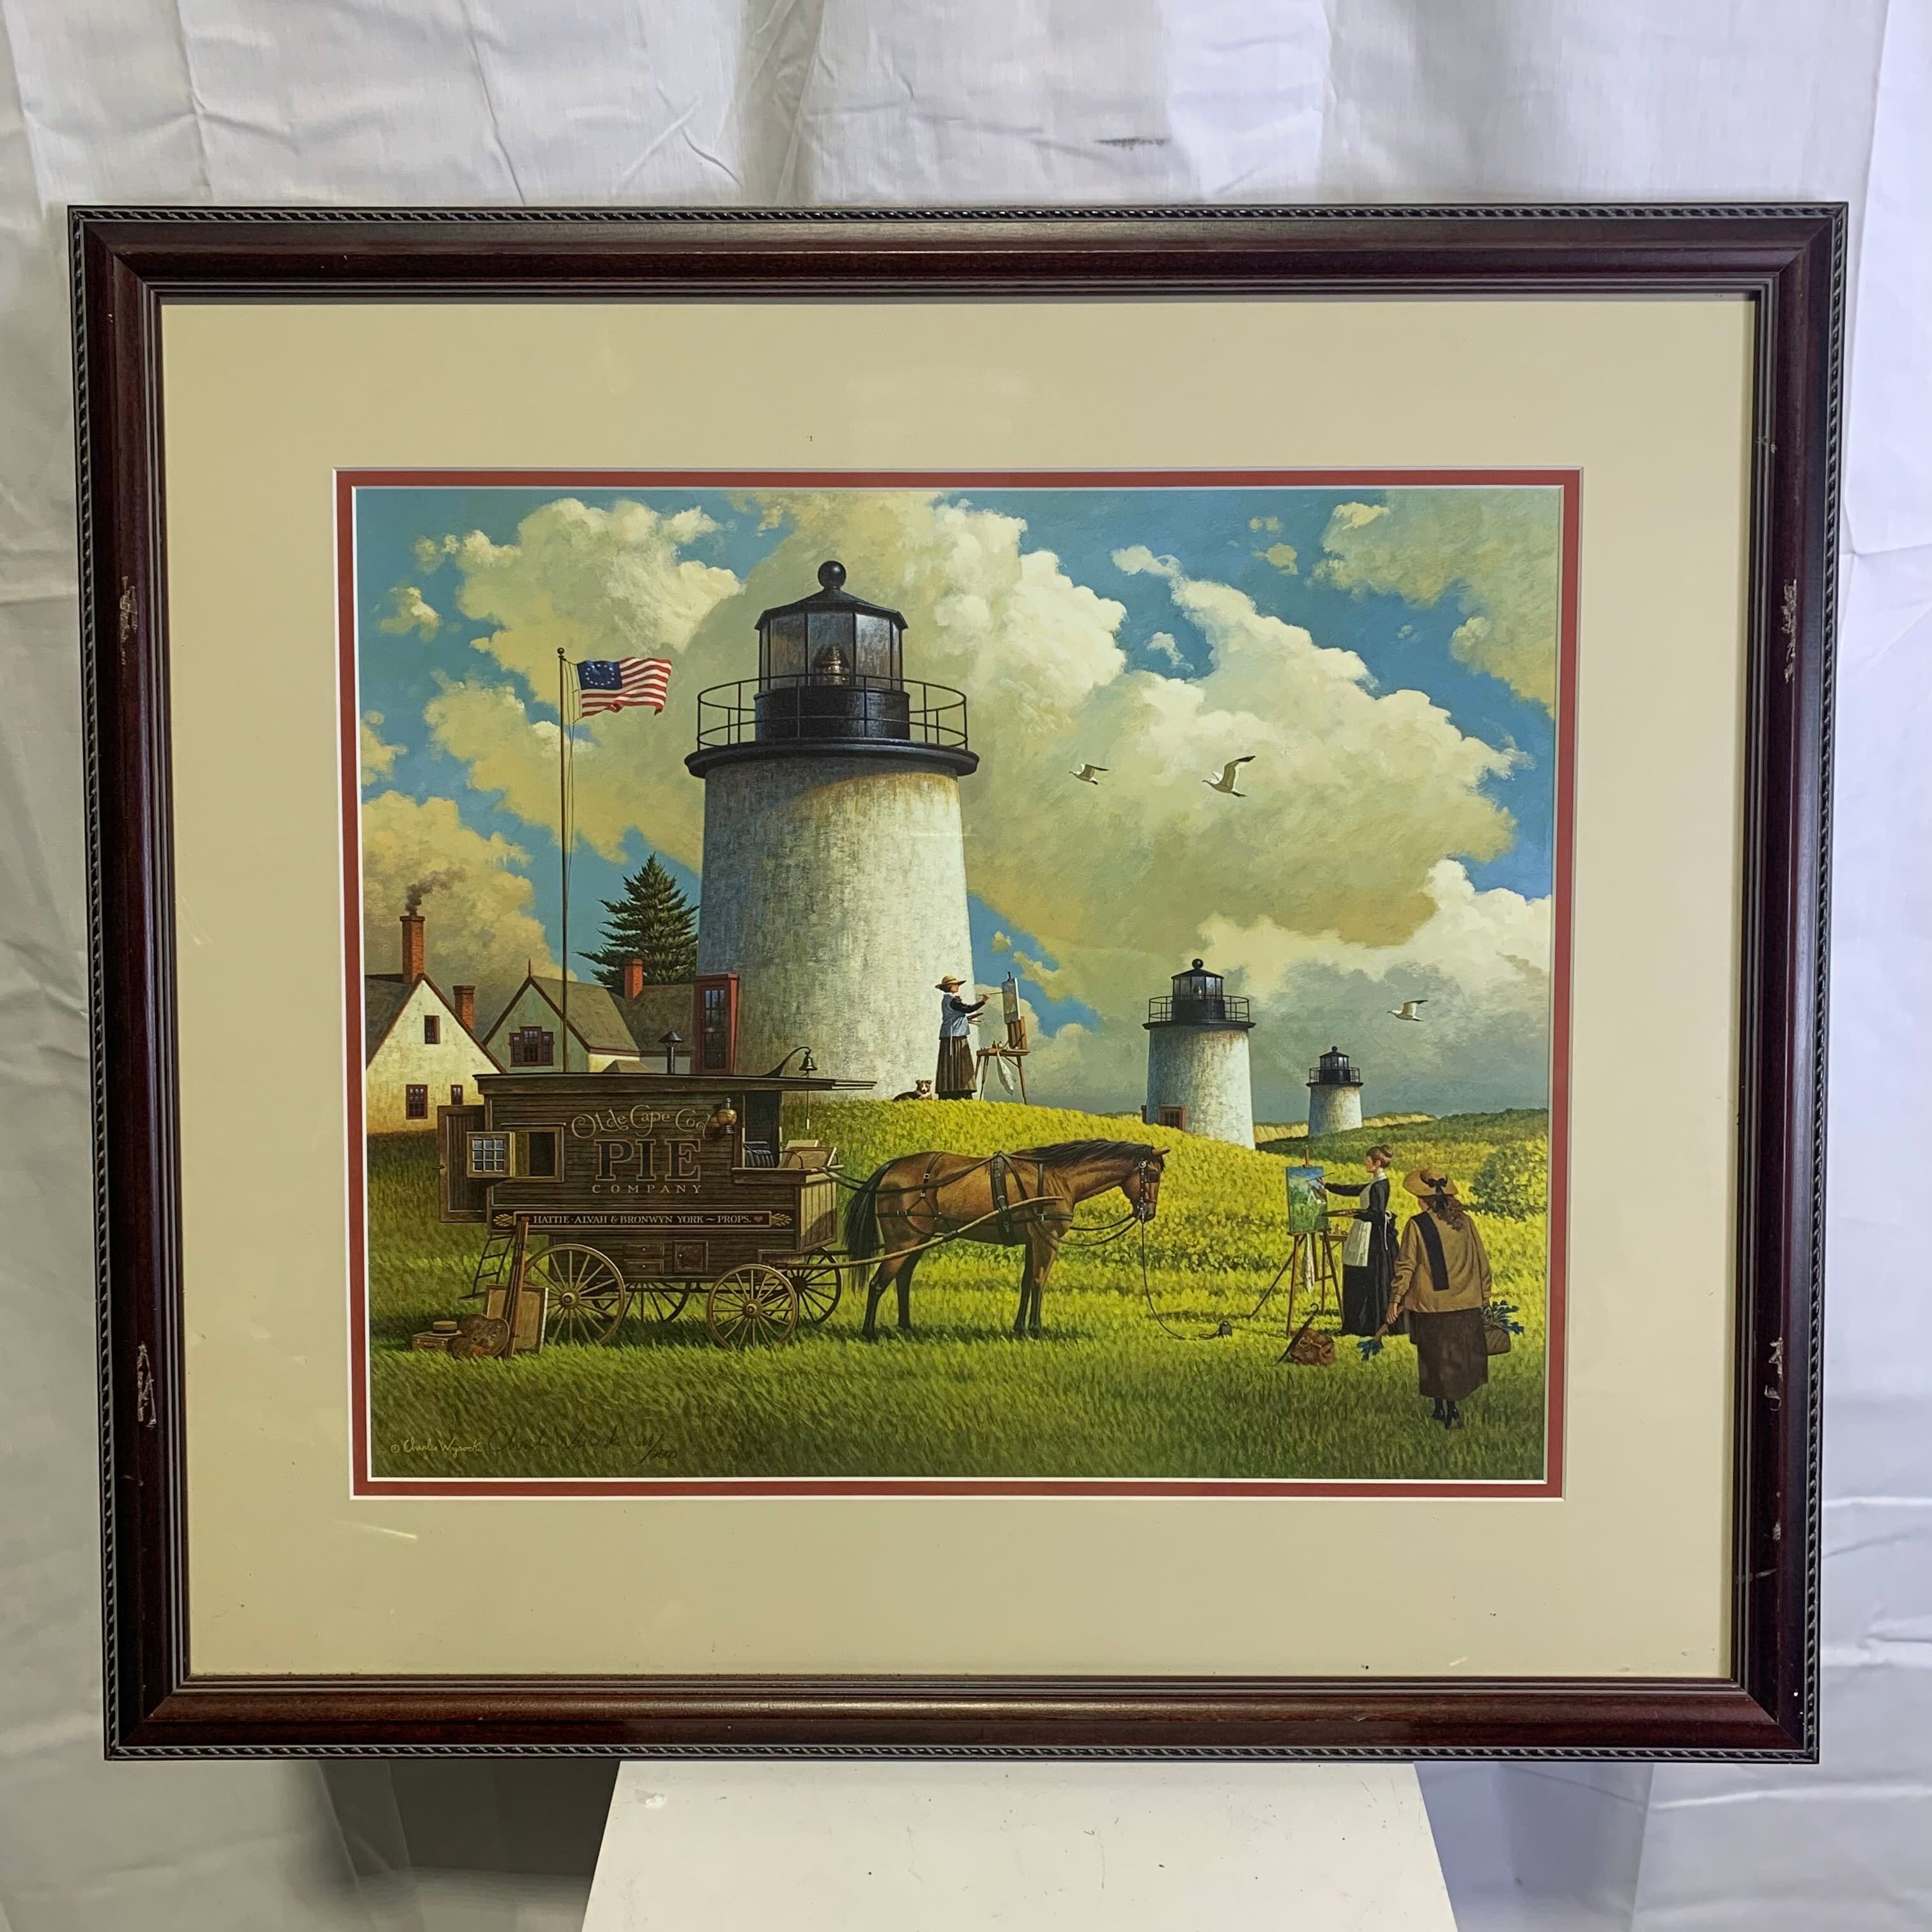 26"x 23" The Three Sisters of Nauset 1880 by Charles Wysocki Framed and Signed Print 668/2500